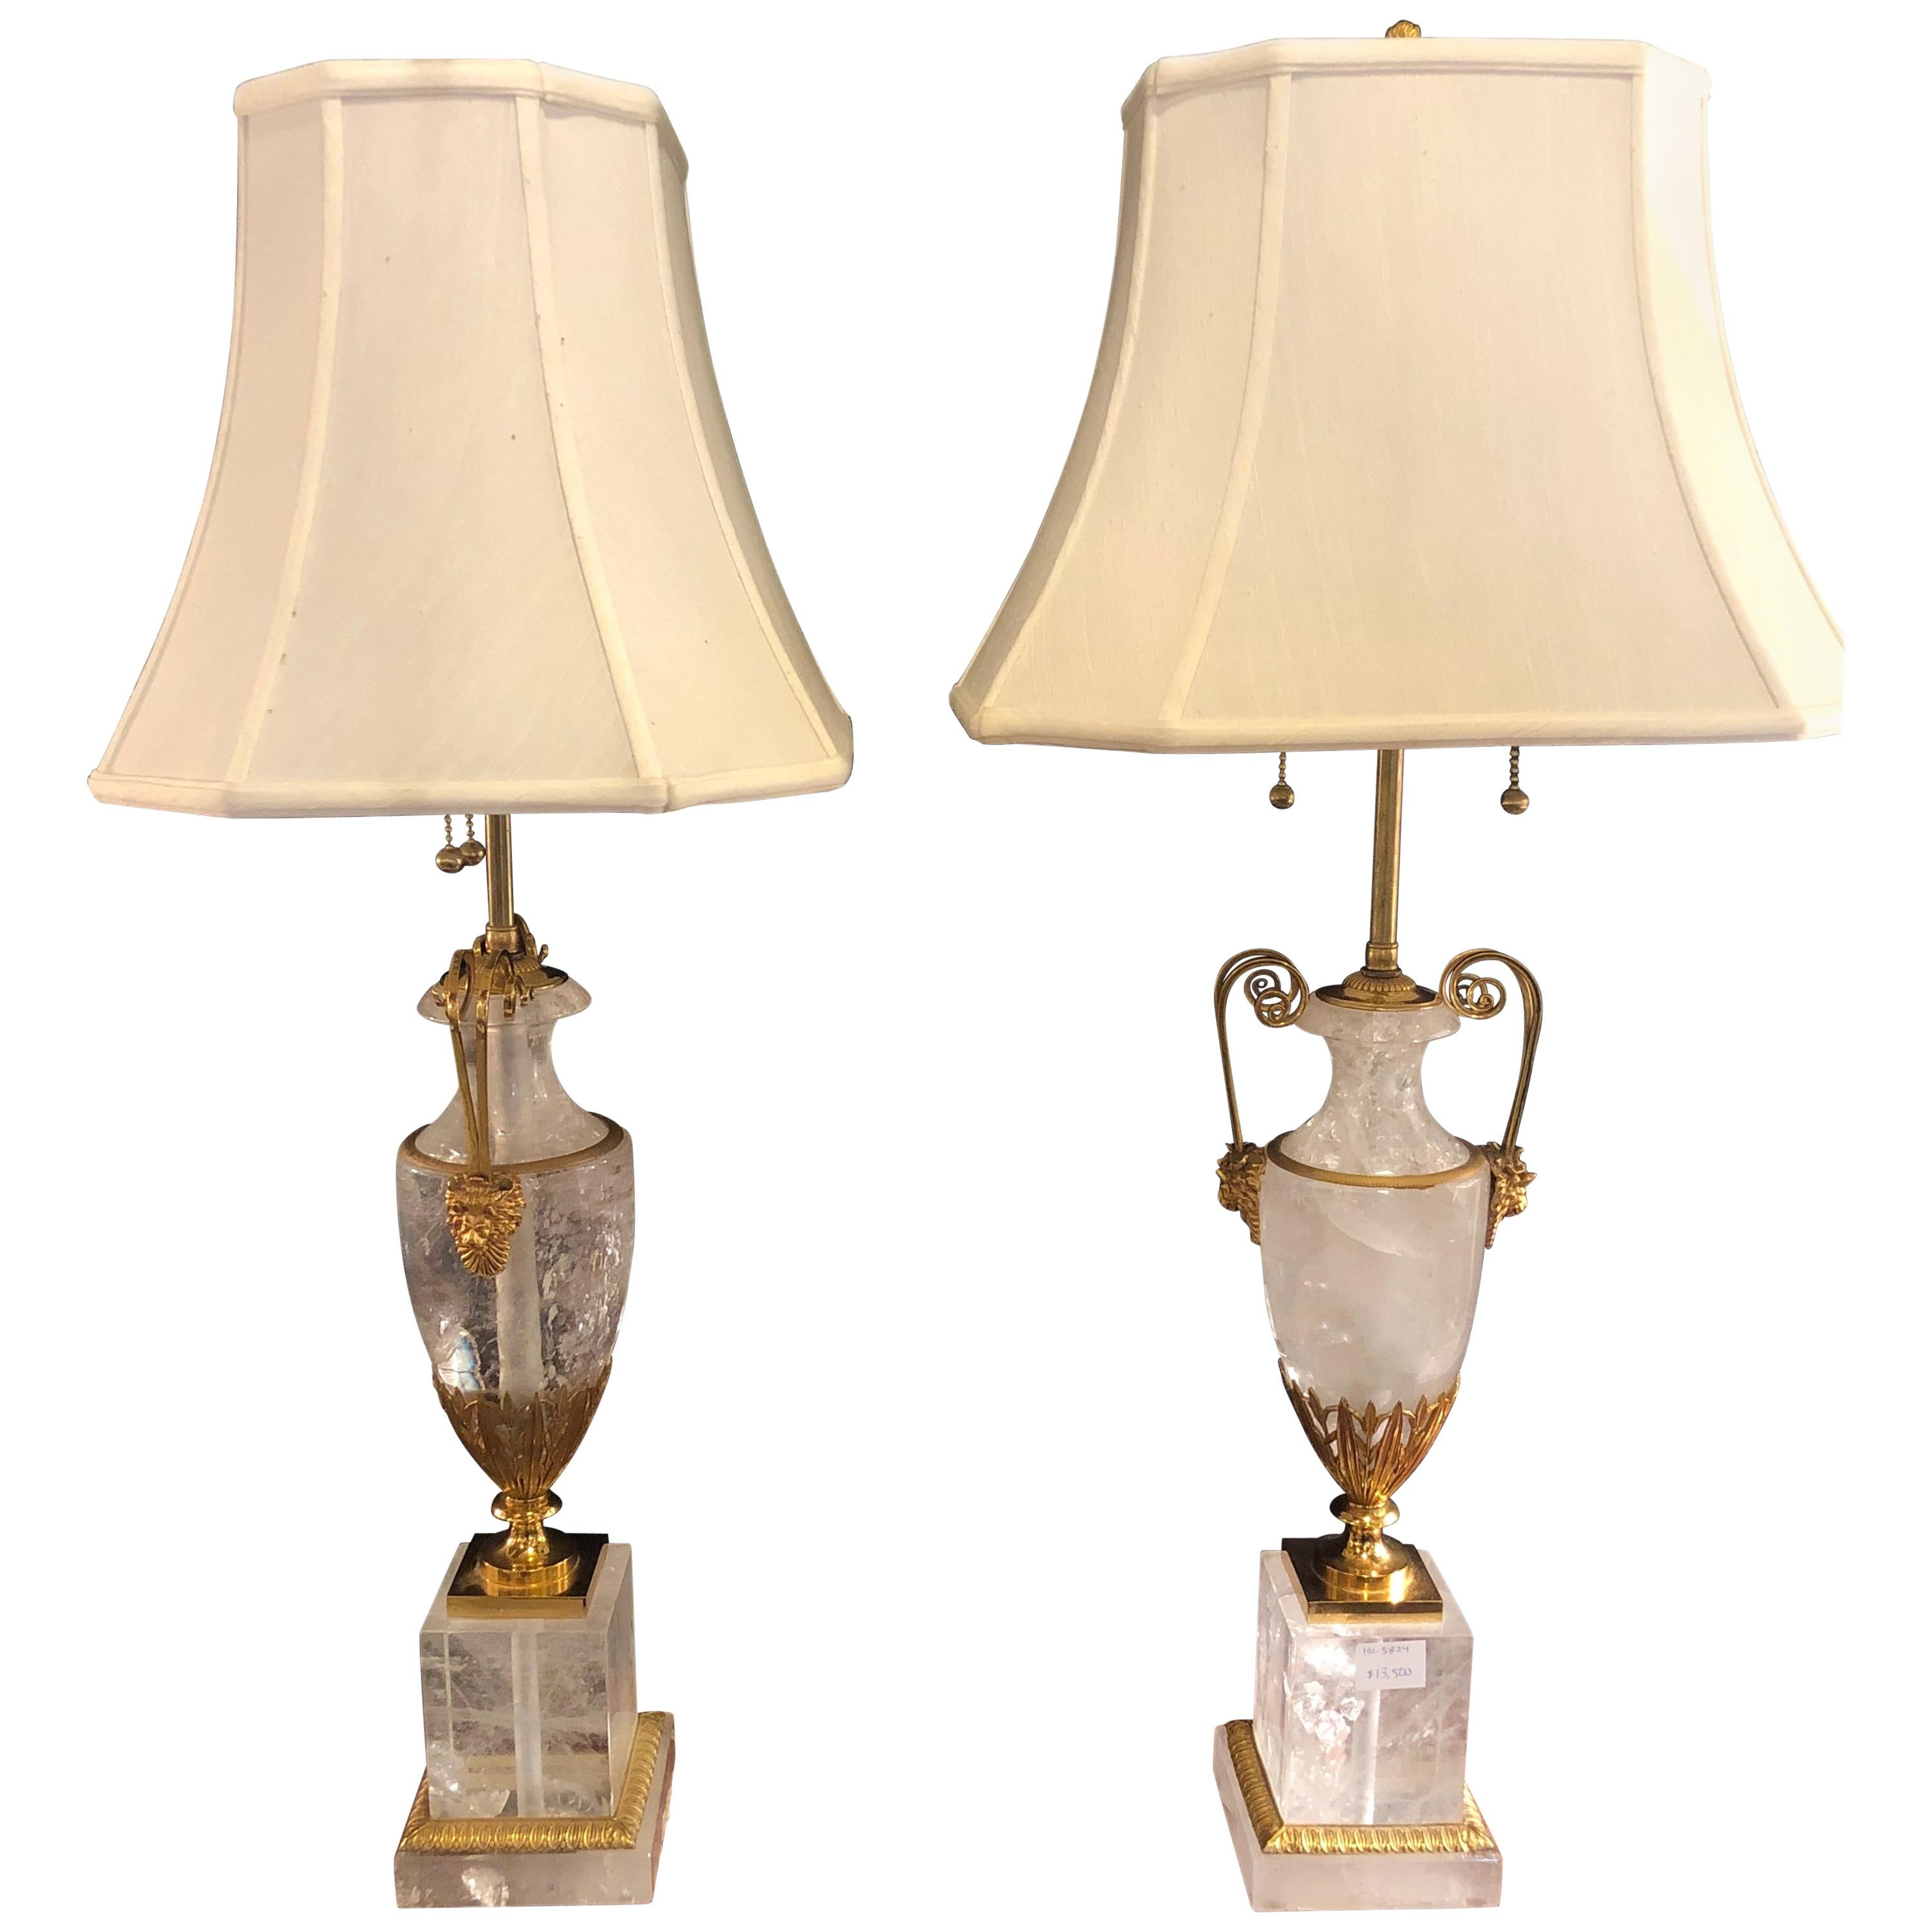 Pair of Palatial Gilt Gold and Rock Crystal Urn Form Table Lamps